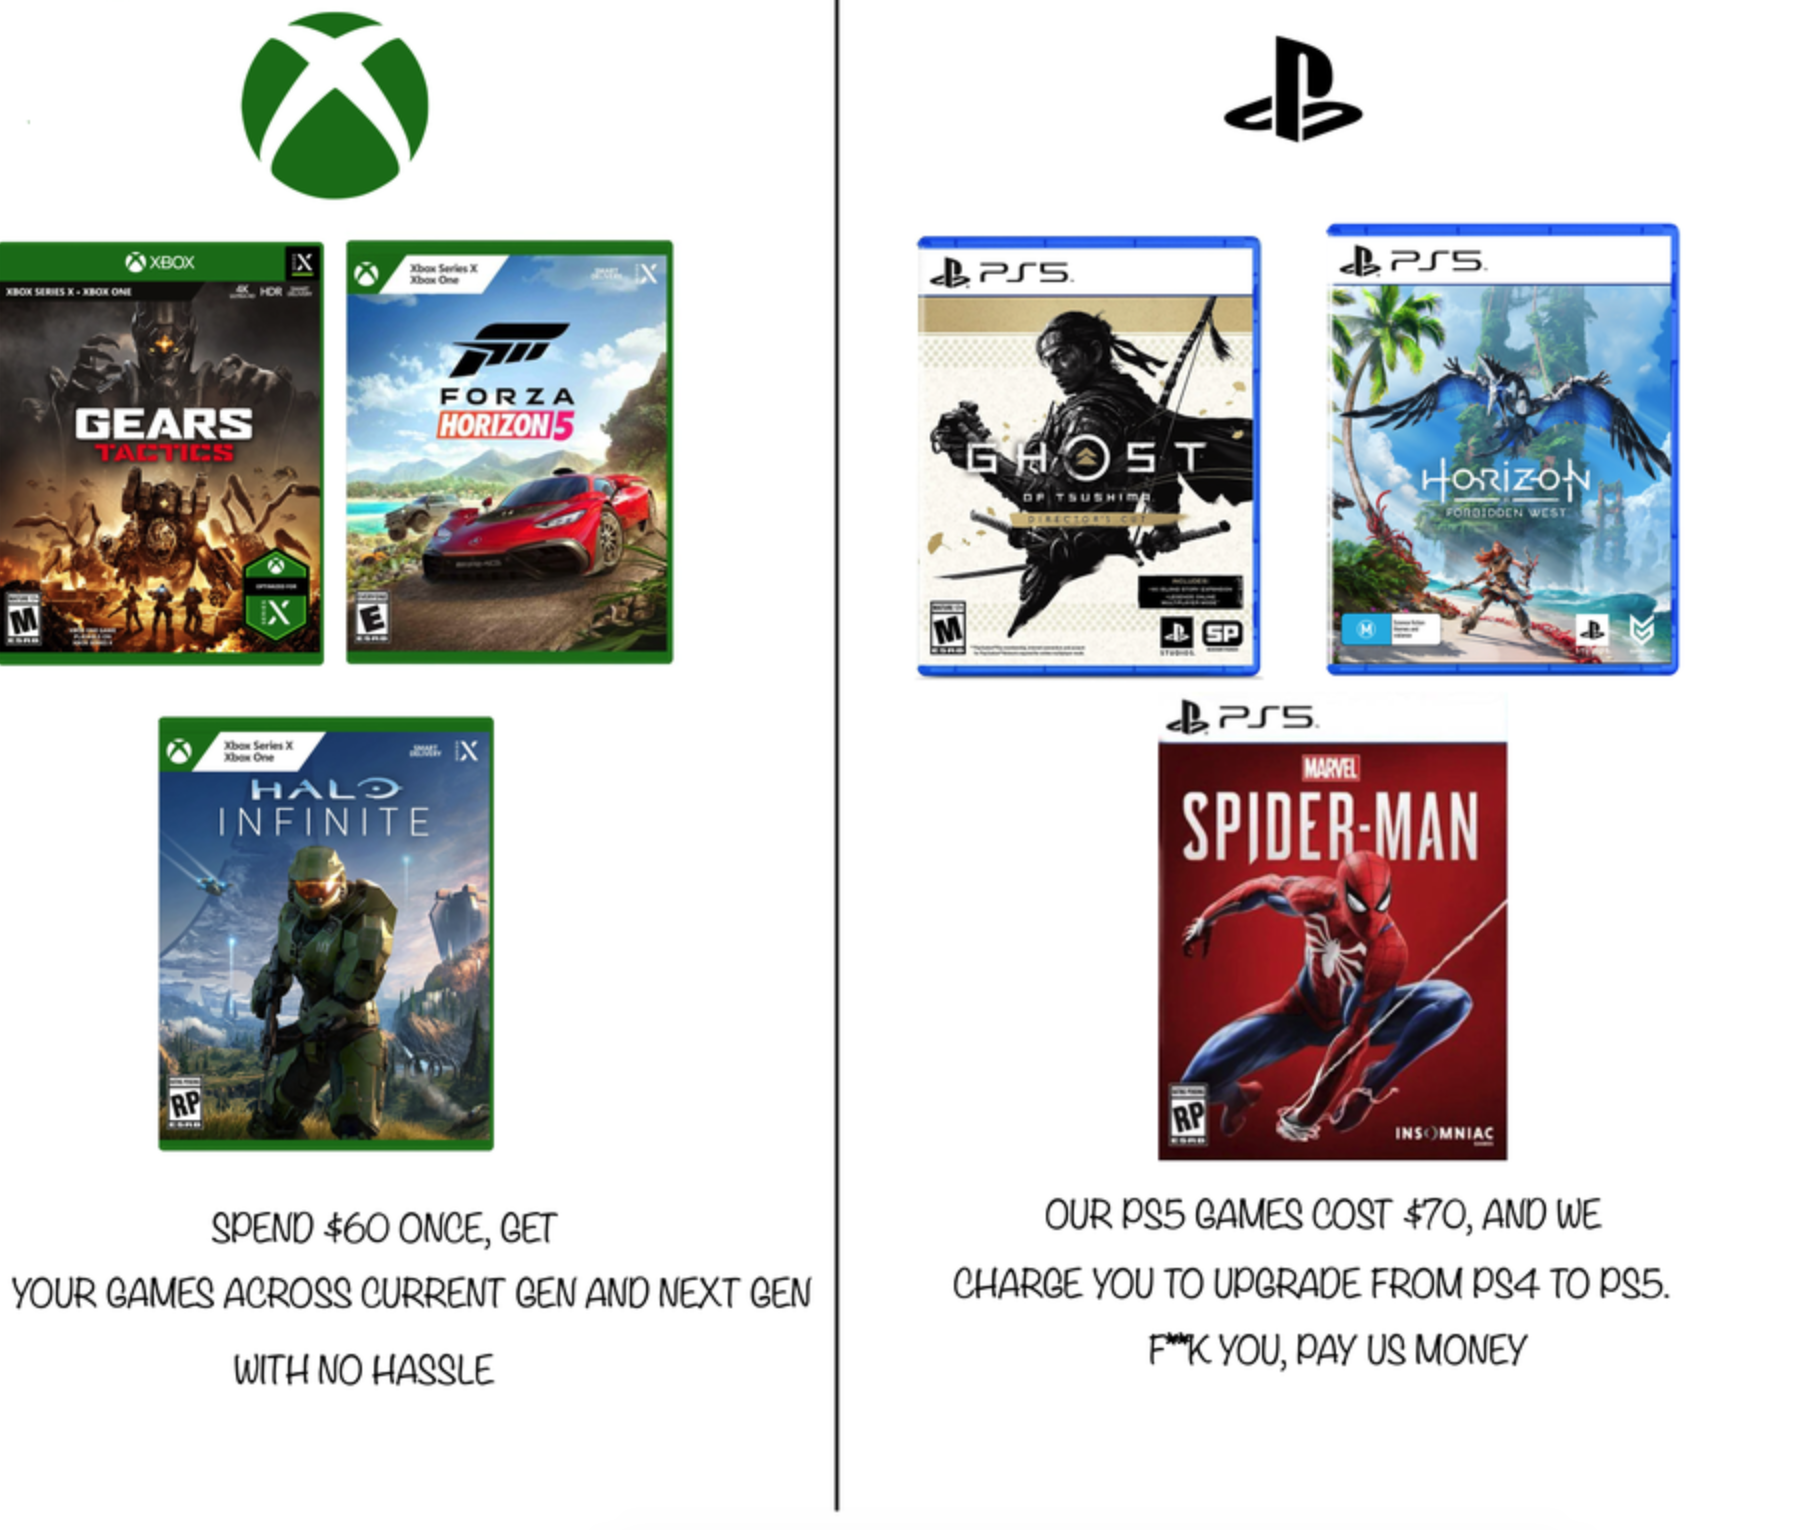 funny gaming memes - games - B Bpss Pss Gears Forza Horizon 5 Ghost Horizon X Halo Infinite Bpss SpiderMan Spend $60 Once, Get Your Games Across Current Gen And Next Gen With No Hassle Our Pss Games Cost 470, And We Charge You To Upgrade From PS4 To PS5. 